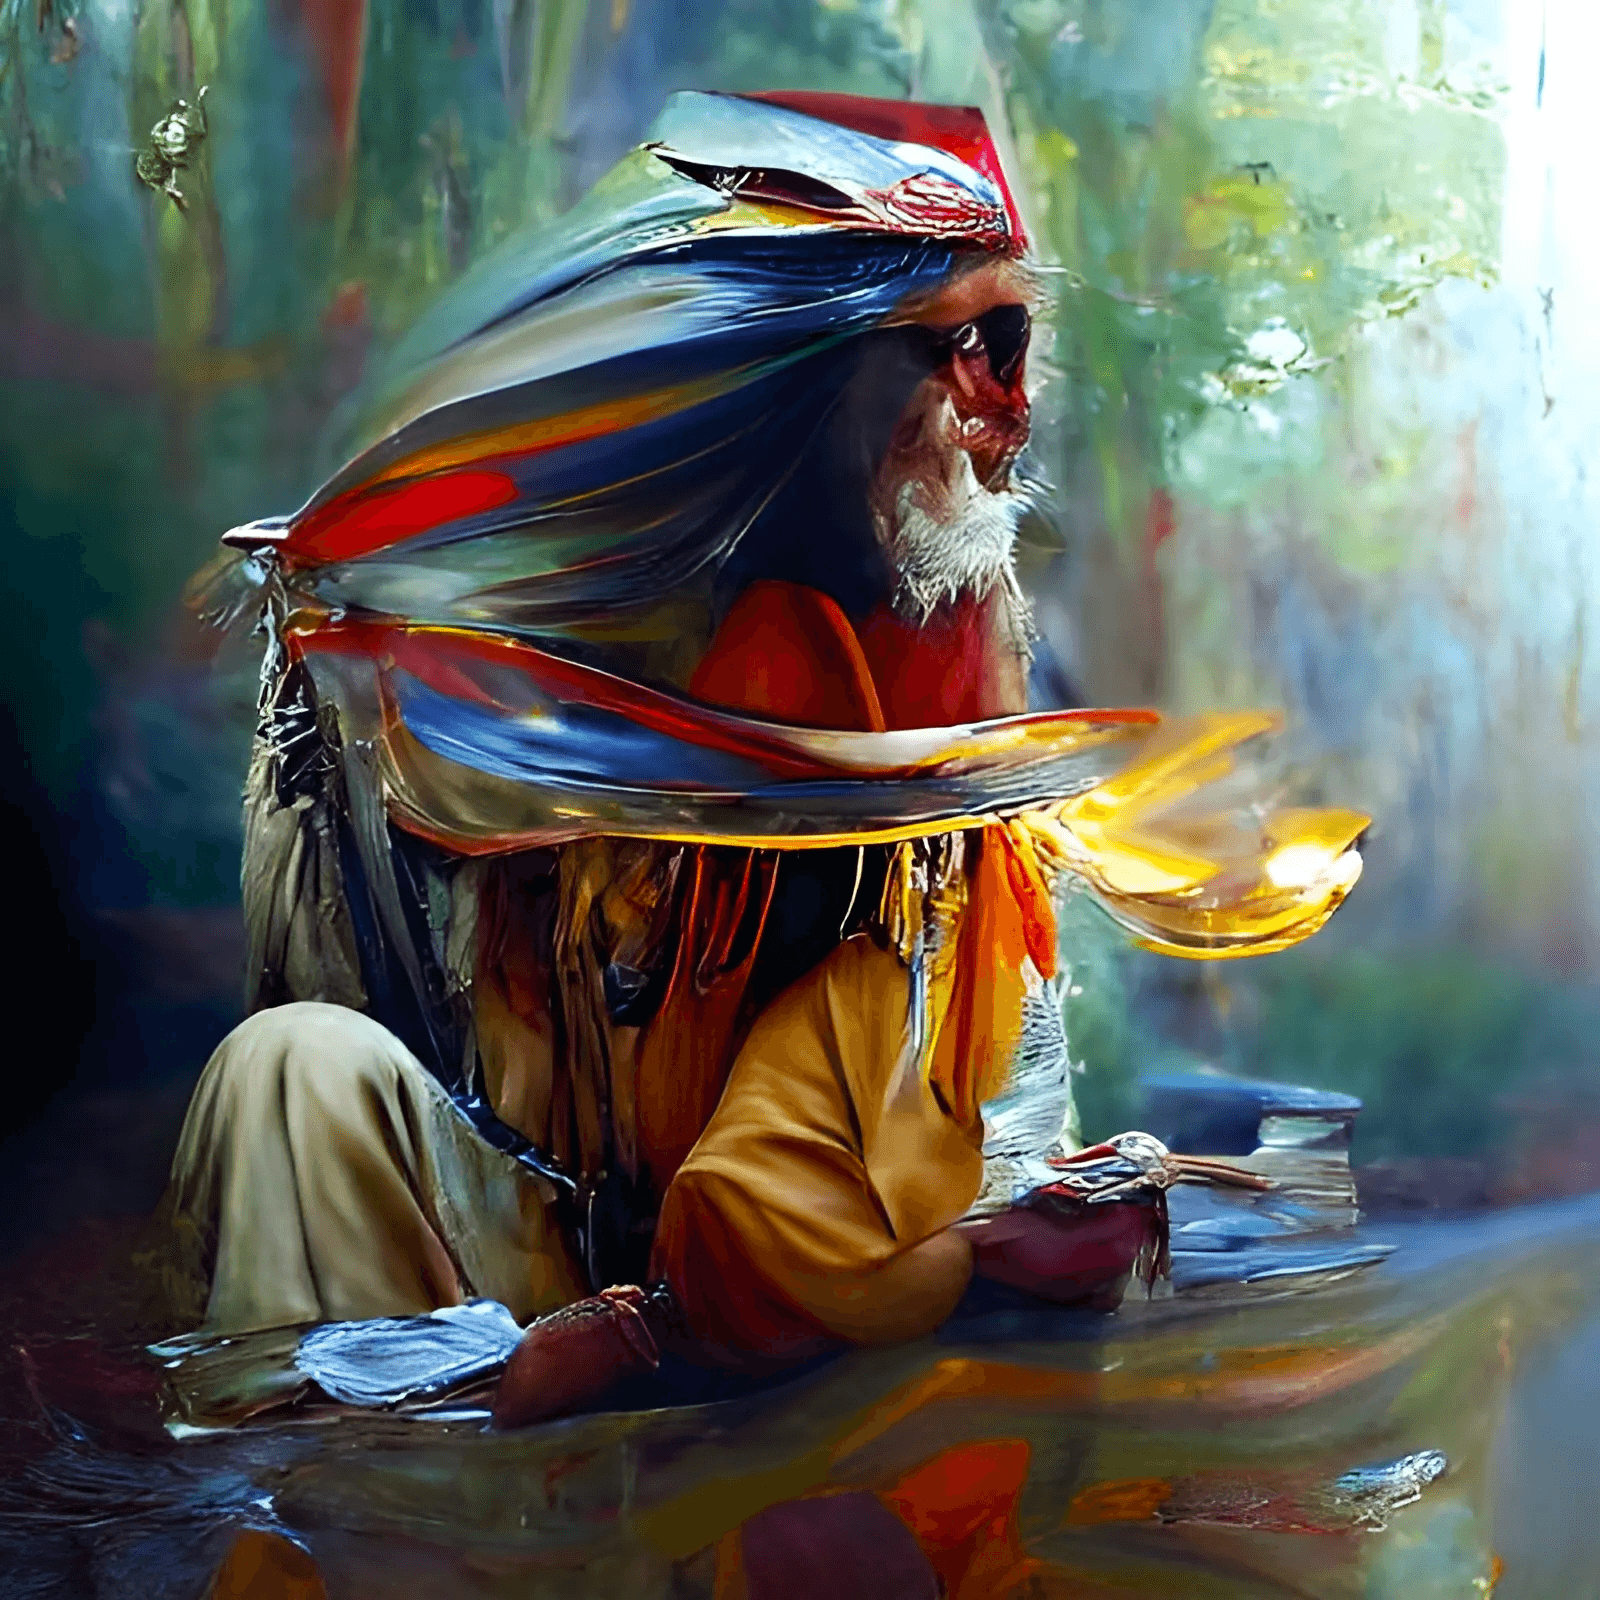 The Indian Mystic